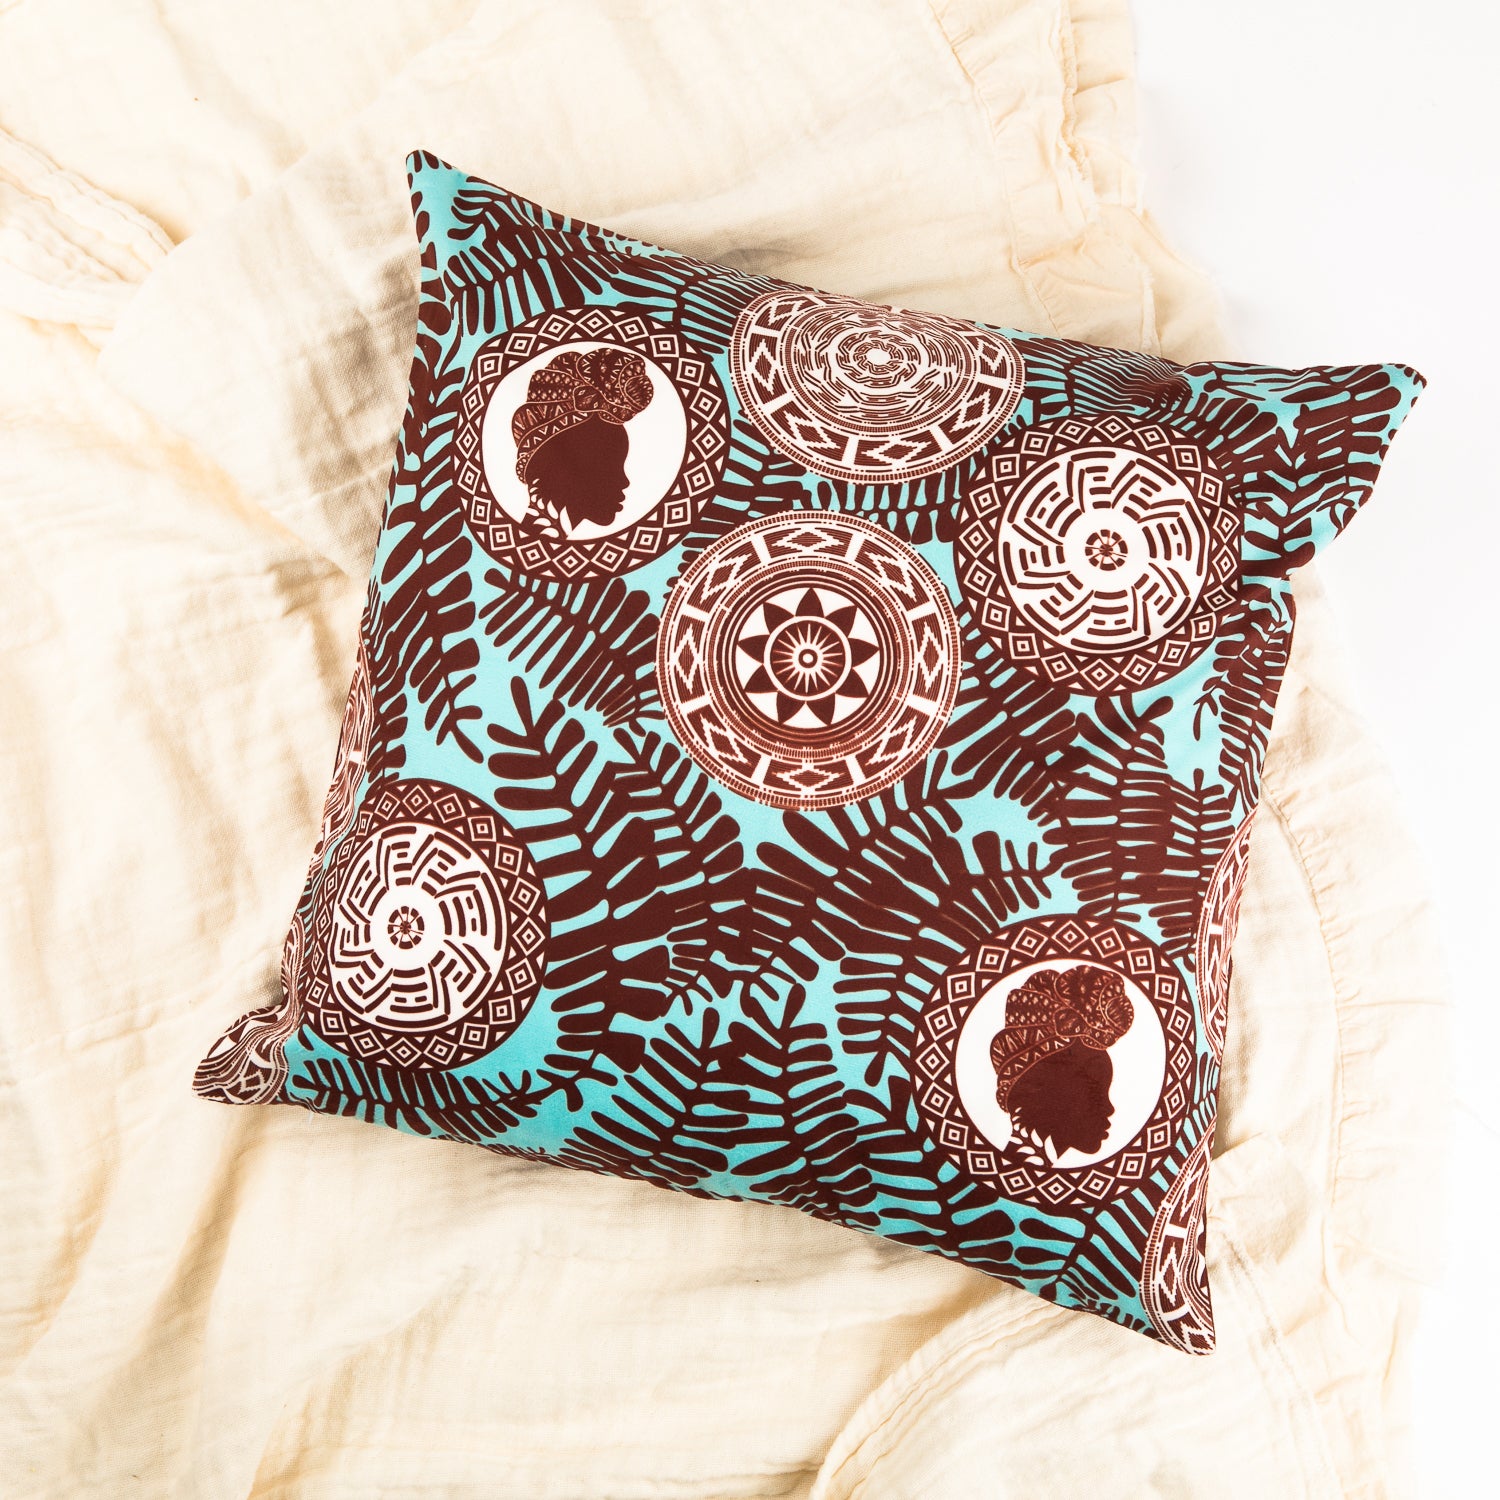 Chocolate Beauty (Teal) Throw Pillow Cover - Izzy & Liv